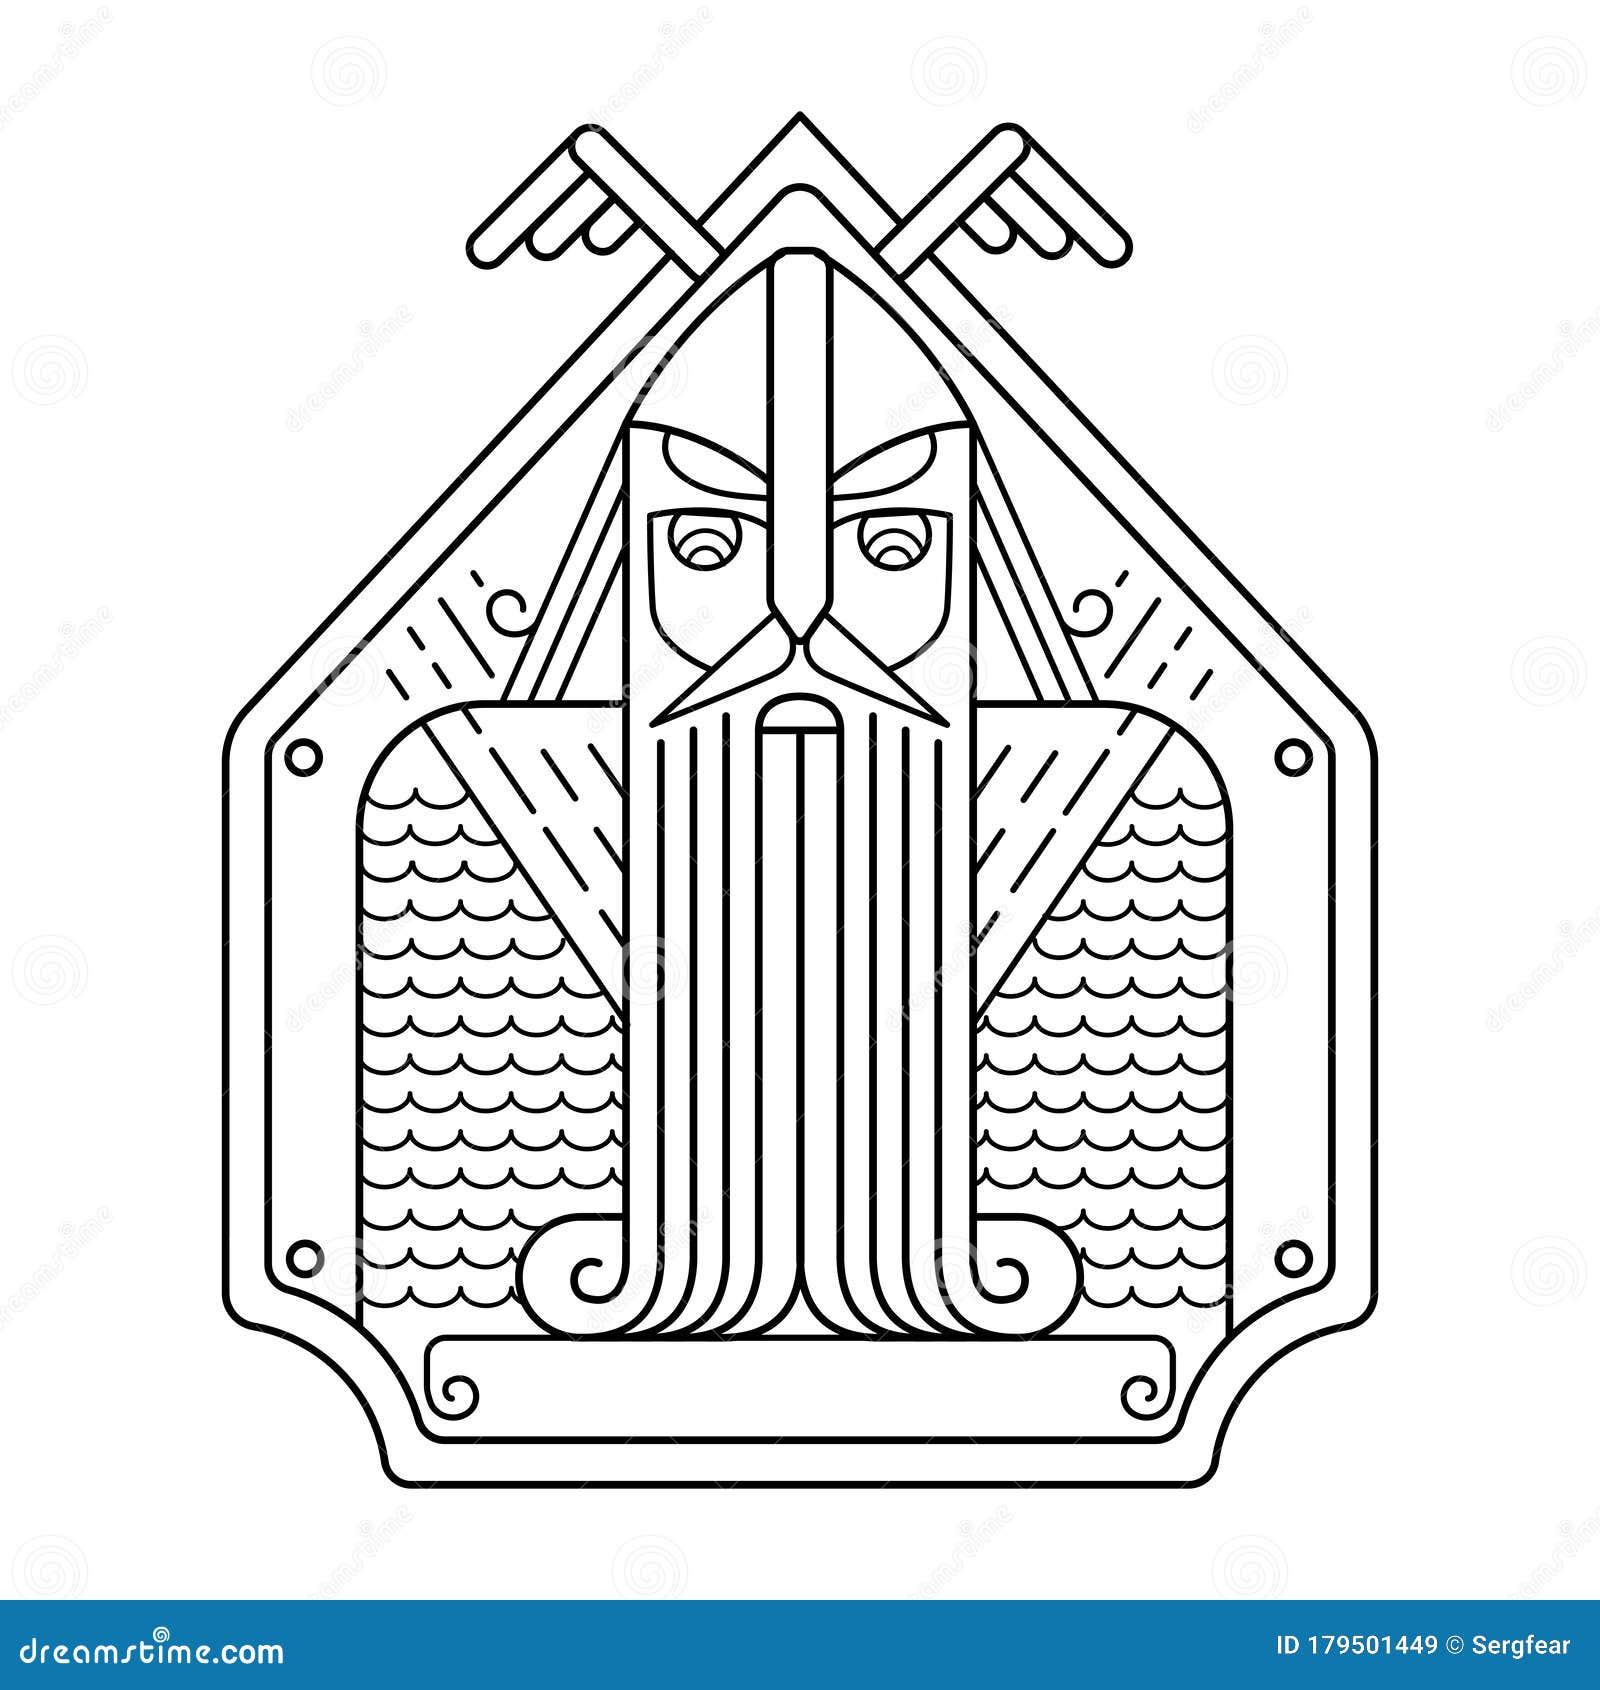 Sketch of a Man in Chain Mail and Beard. Stock Vector - Illustration of